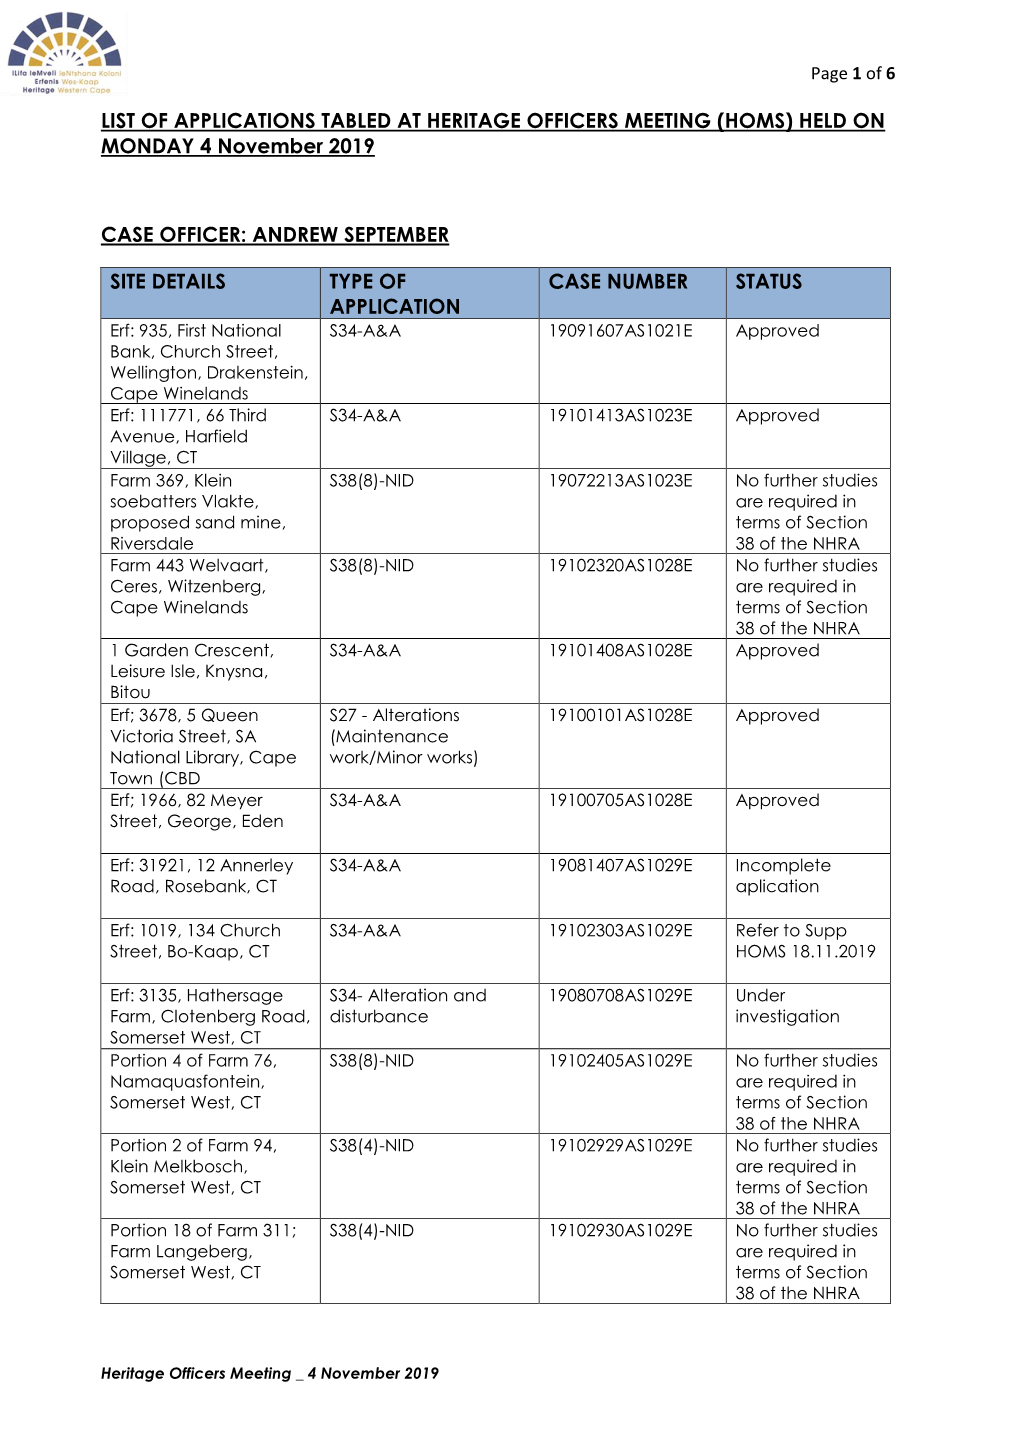 LIST of APPLICATIONS TABLED at HERITAGE OFFICERS MEETING (HOMS) HELD on MONDAY 4 November 2019 CASE OFFICER: ANDREW SEPTEMBER S